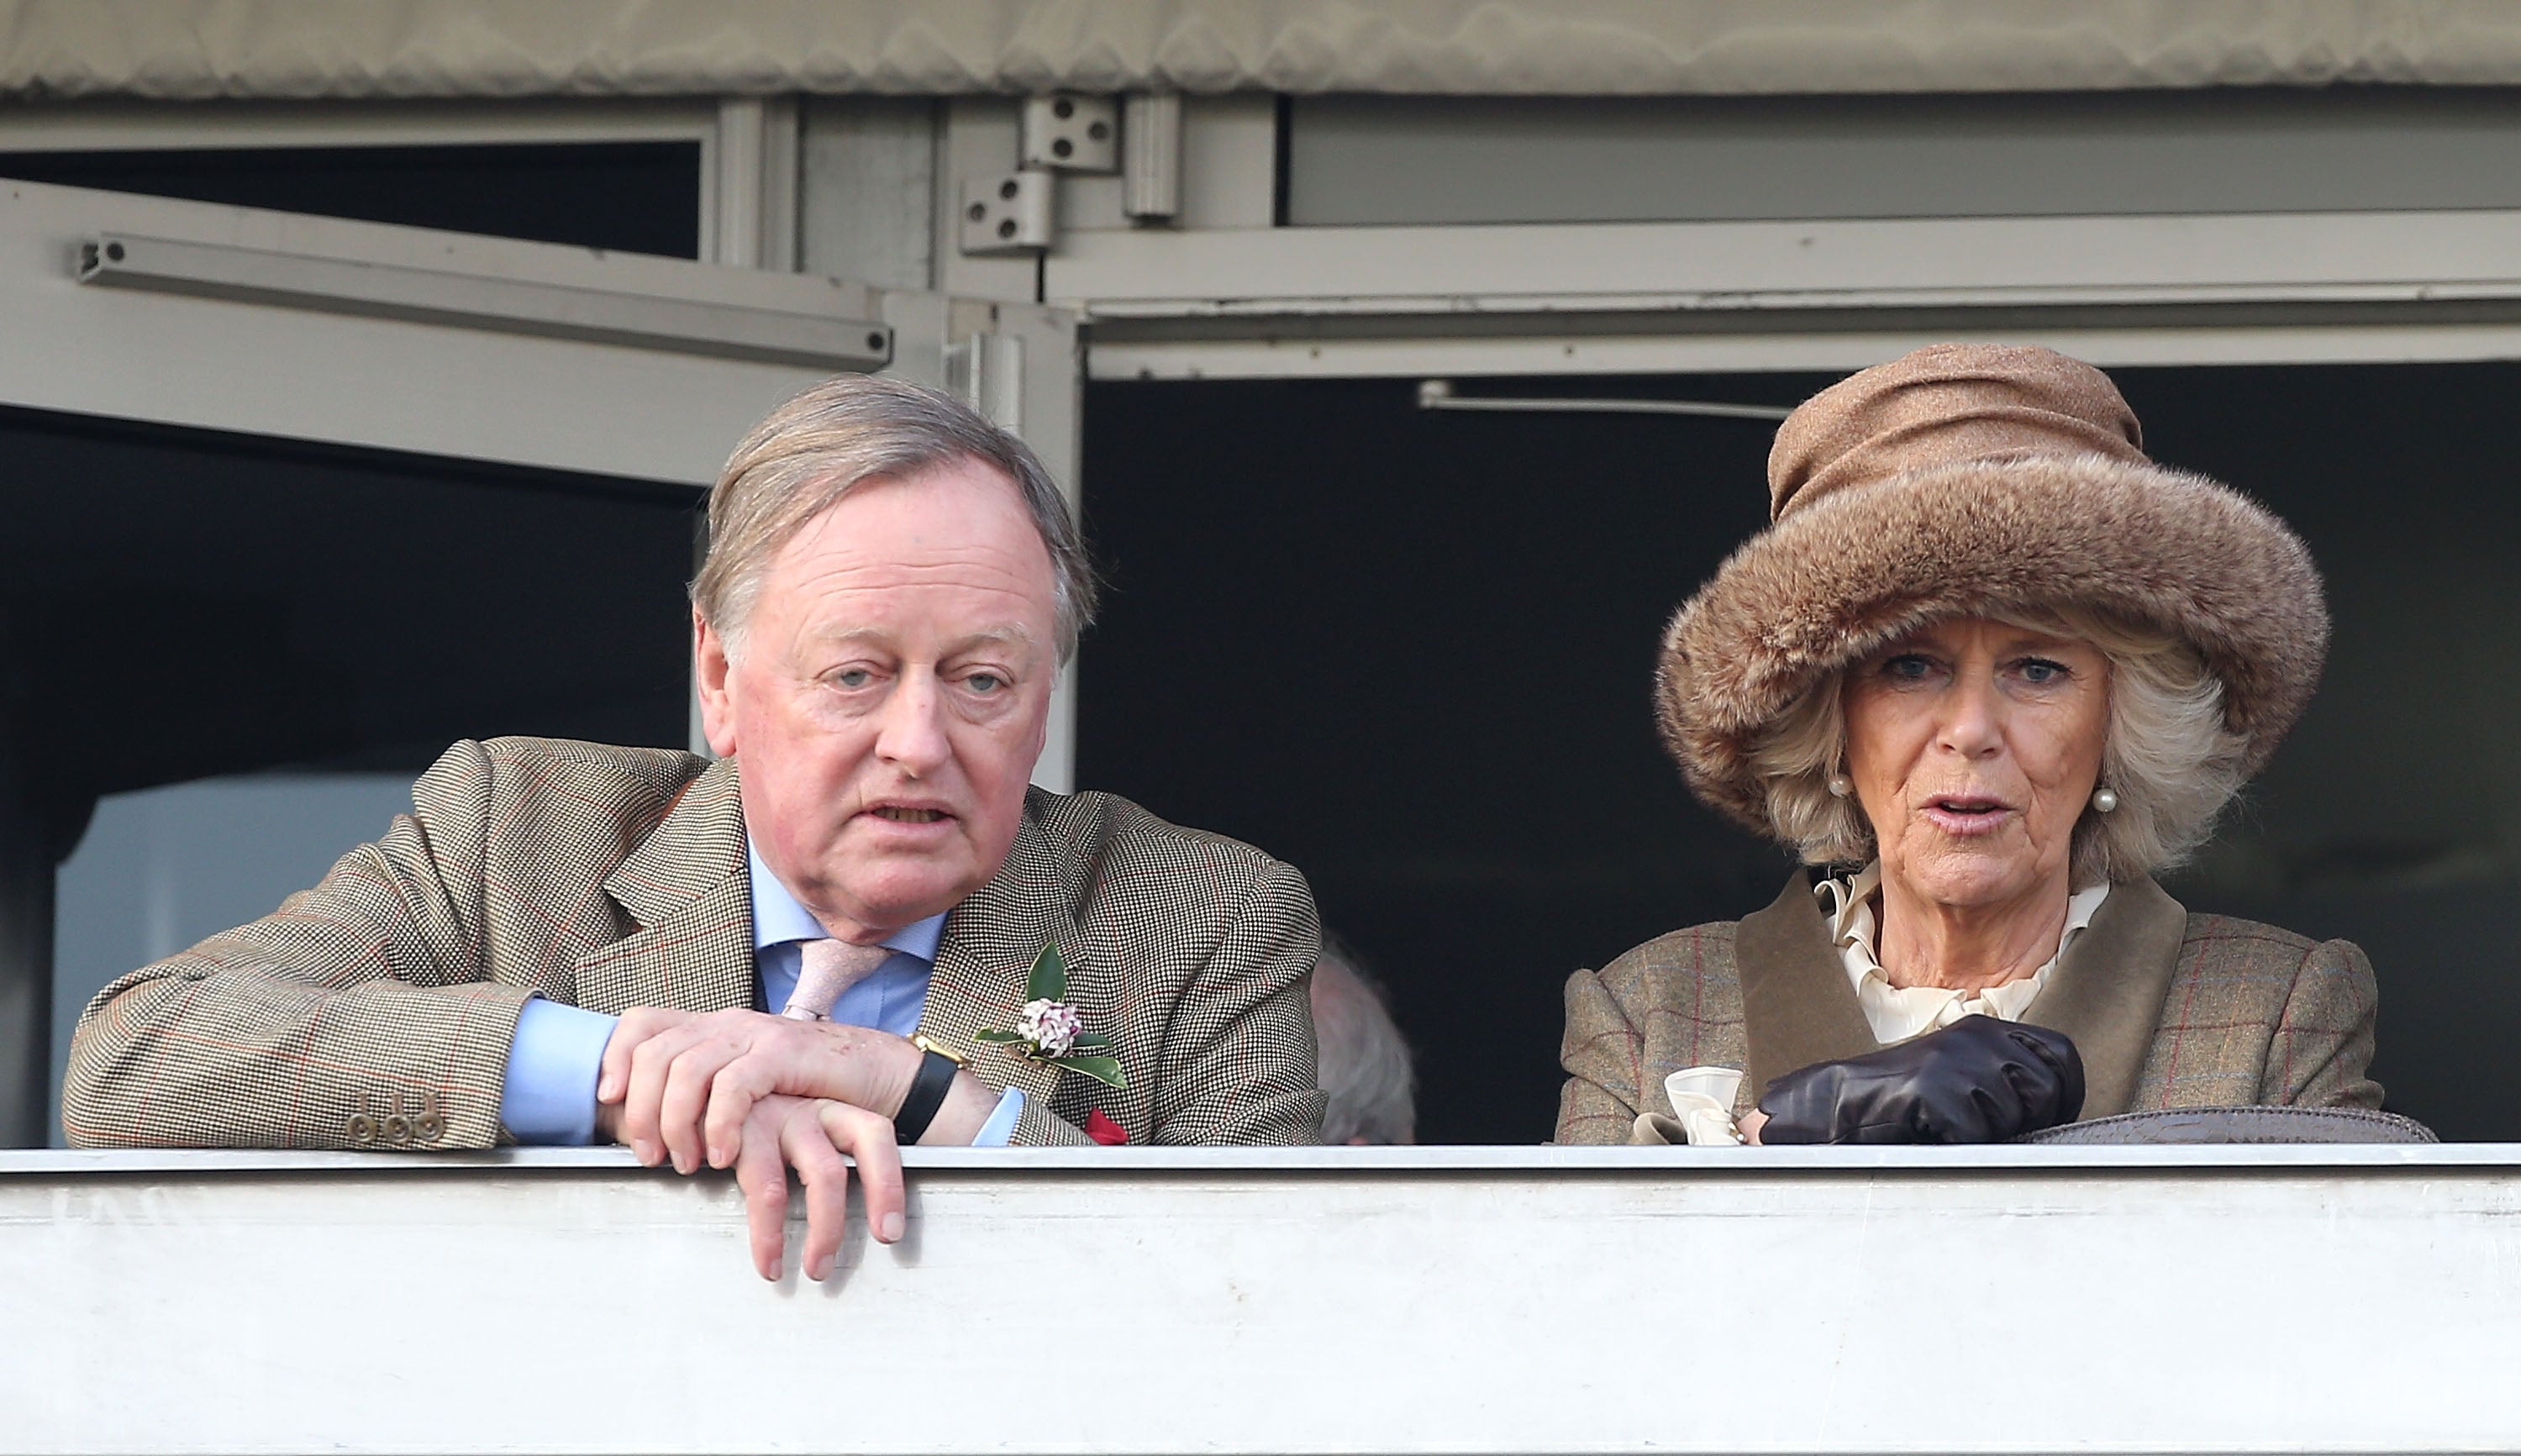 Andrew Parker Bowles OBE and Camilla, Duchess of Cornwall attend Ladies Day, day 2 of The Cheltenham Festival at Cheltenham Racecourse on March 12, 2014